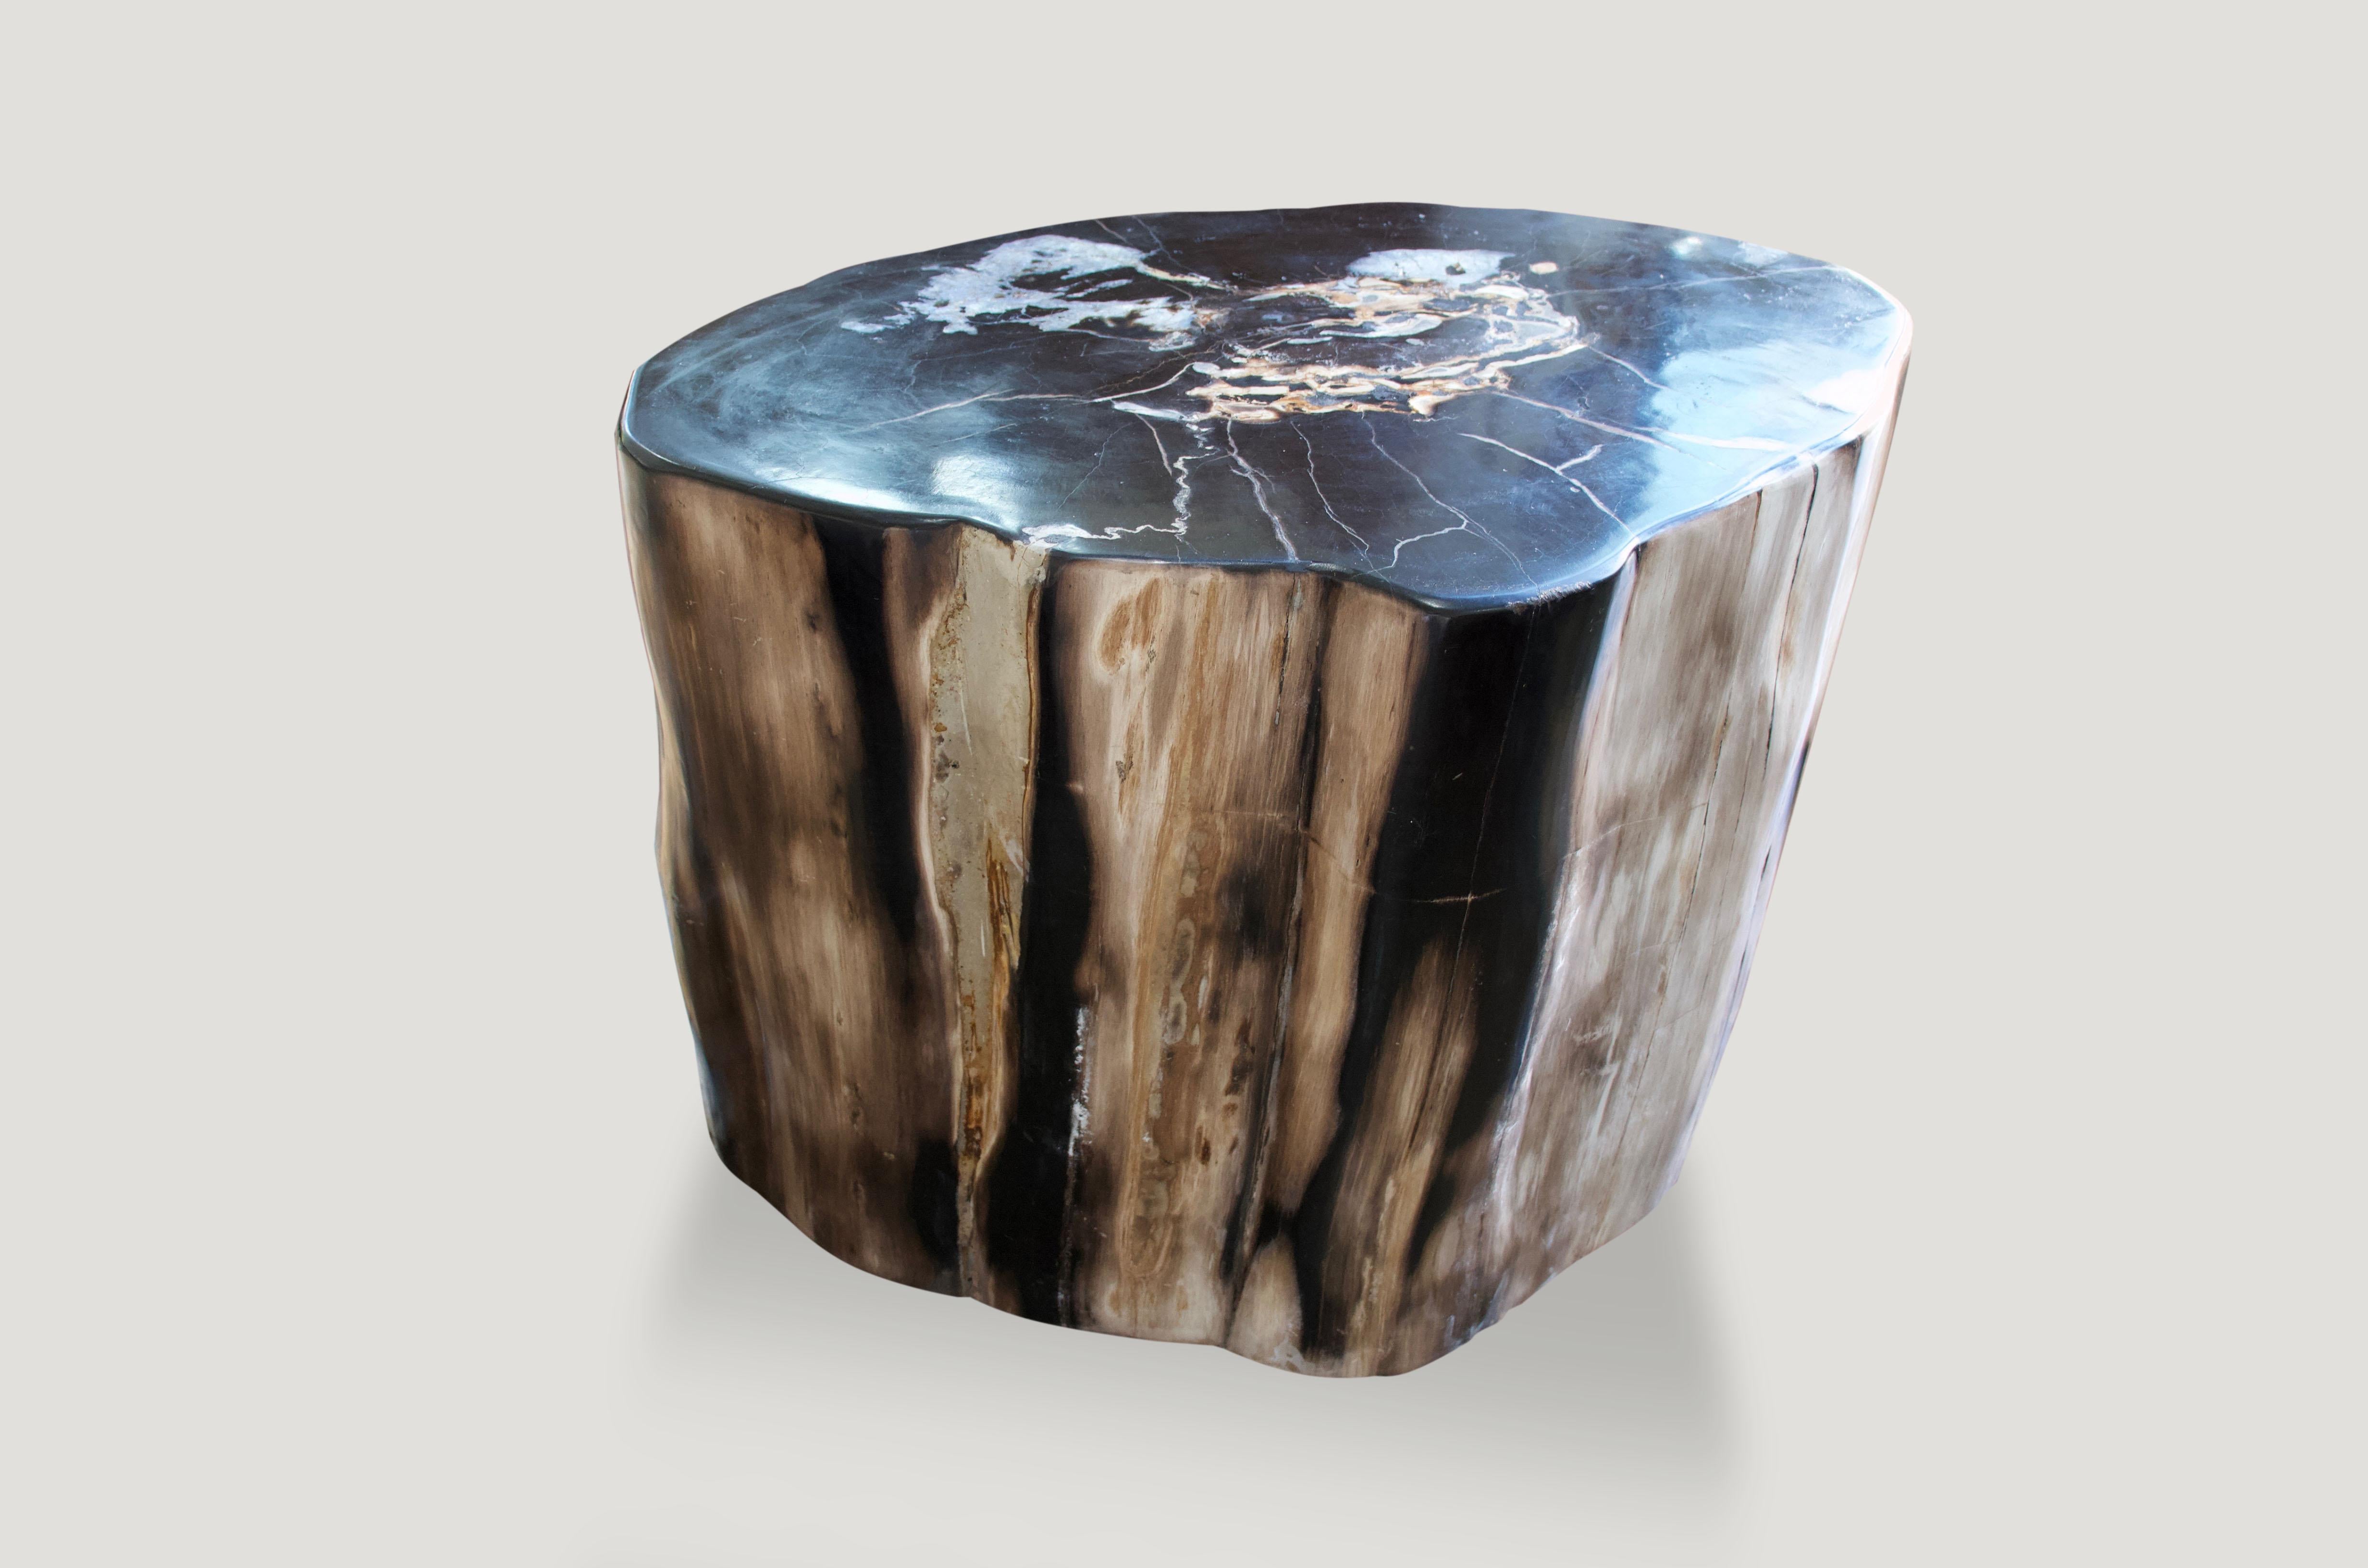 Fabulous color tones. We have a pair available, cut from the same petrified log. The price reflects one.

We source the highest quality petrified wood available. Each piece is hand selected and highly polished with minimal cracks. Petrified wood